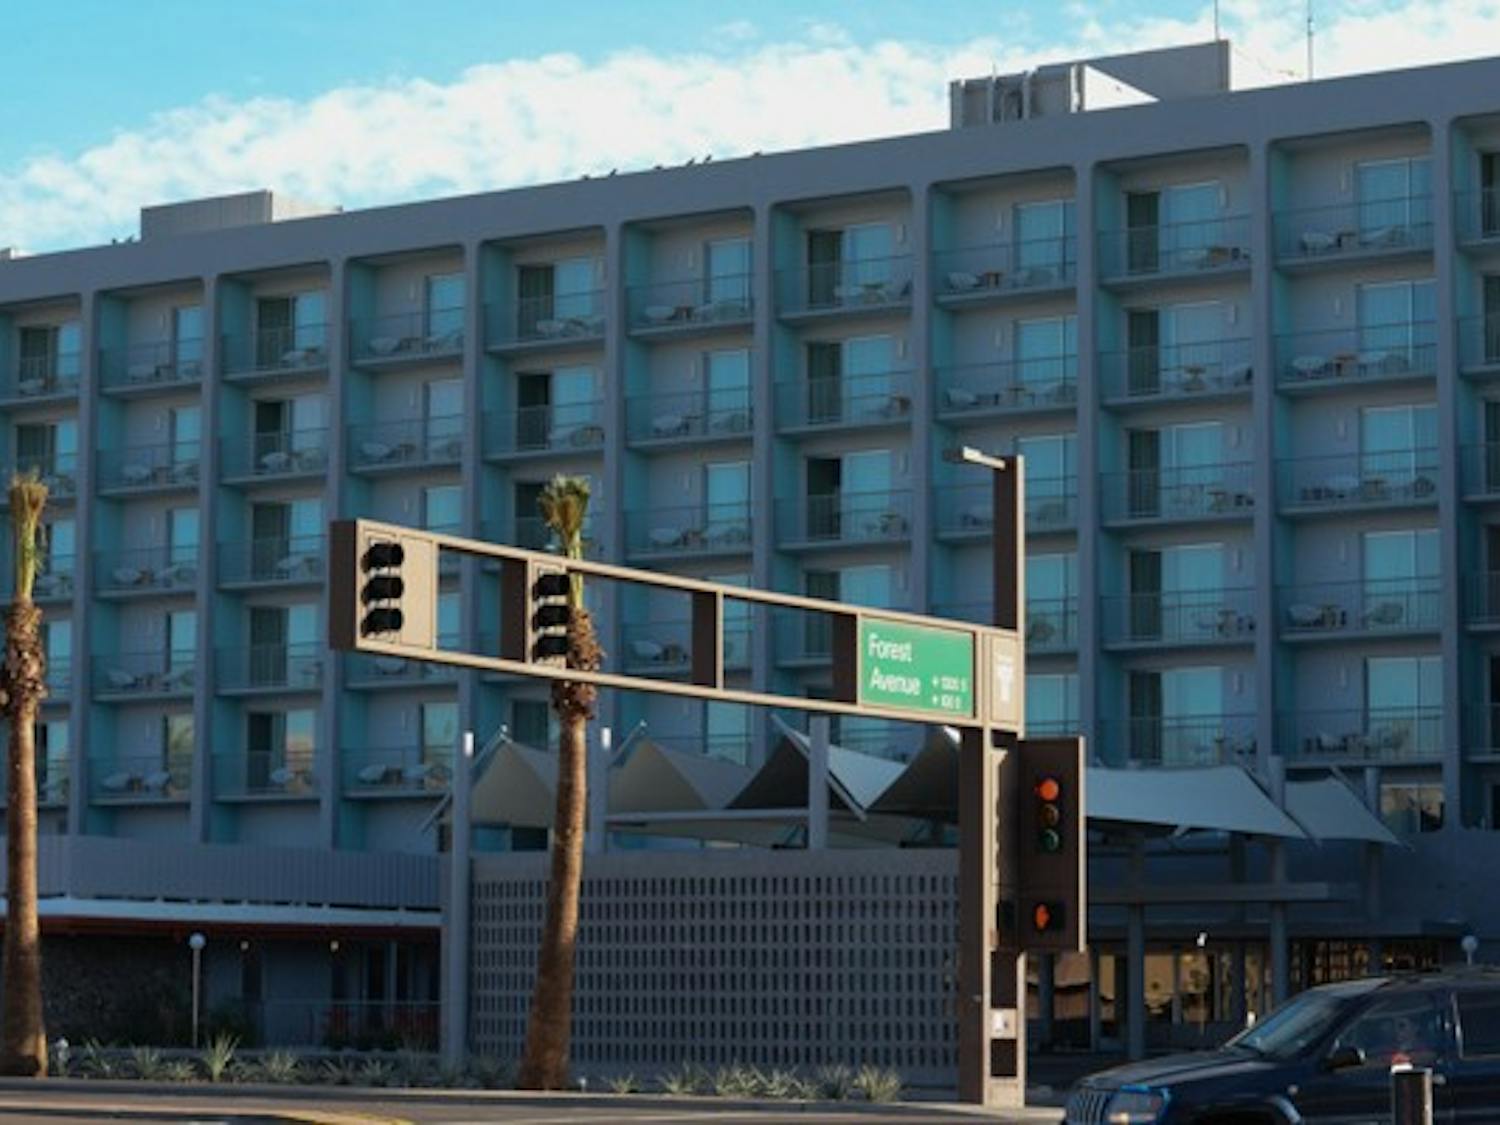 The Graduate Hotel on Apache and College avenues opened in the beginning of November 2014. In addition to the Normal Diner, the hotel will soon open a new restaurant later this year. (Photo by Jonathan Williams)